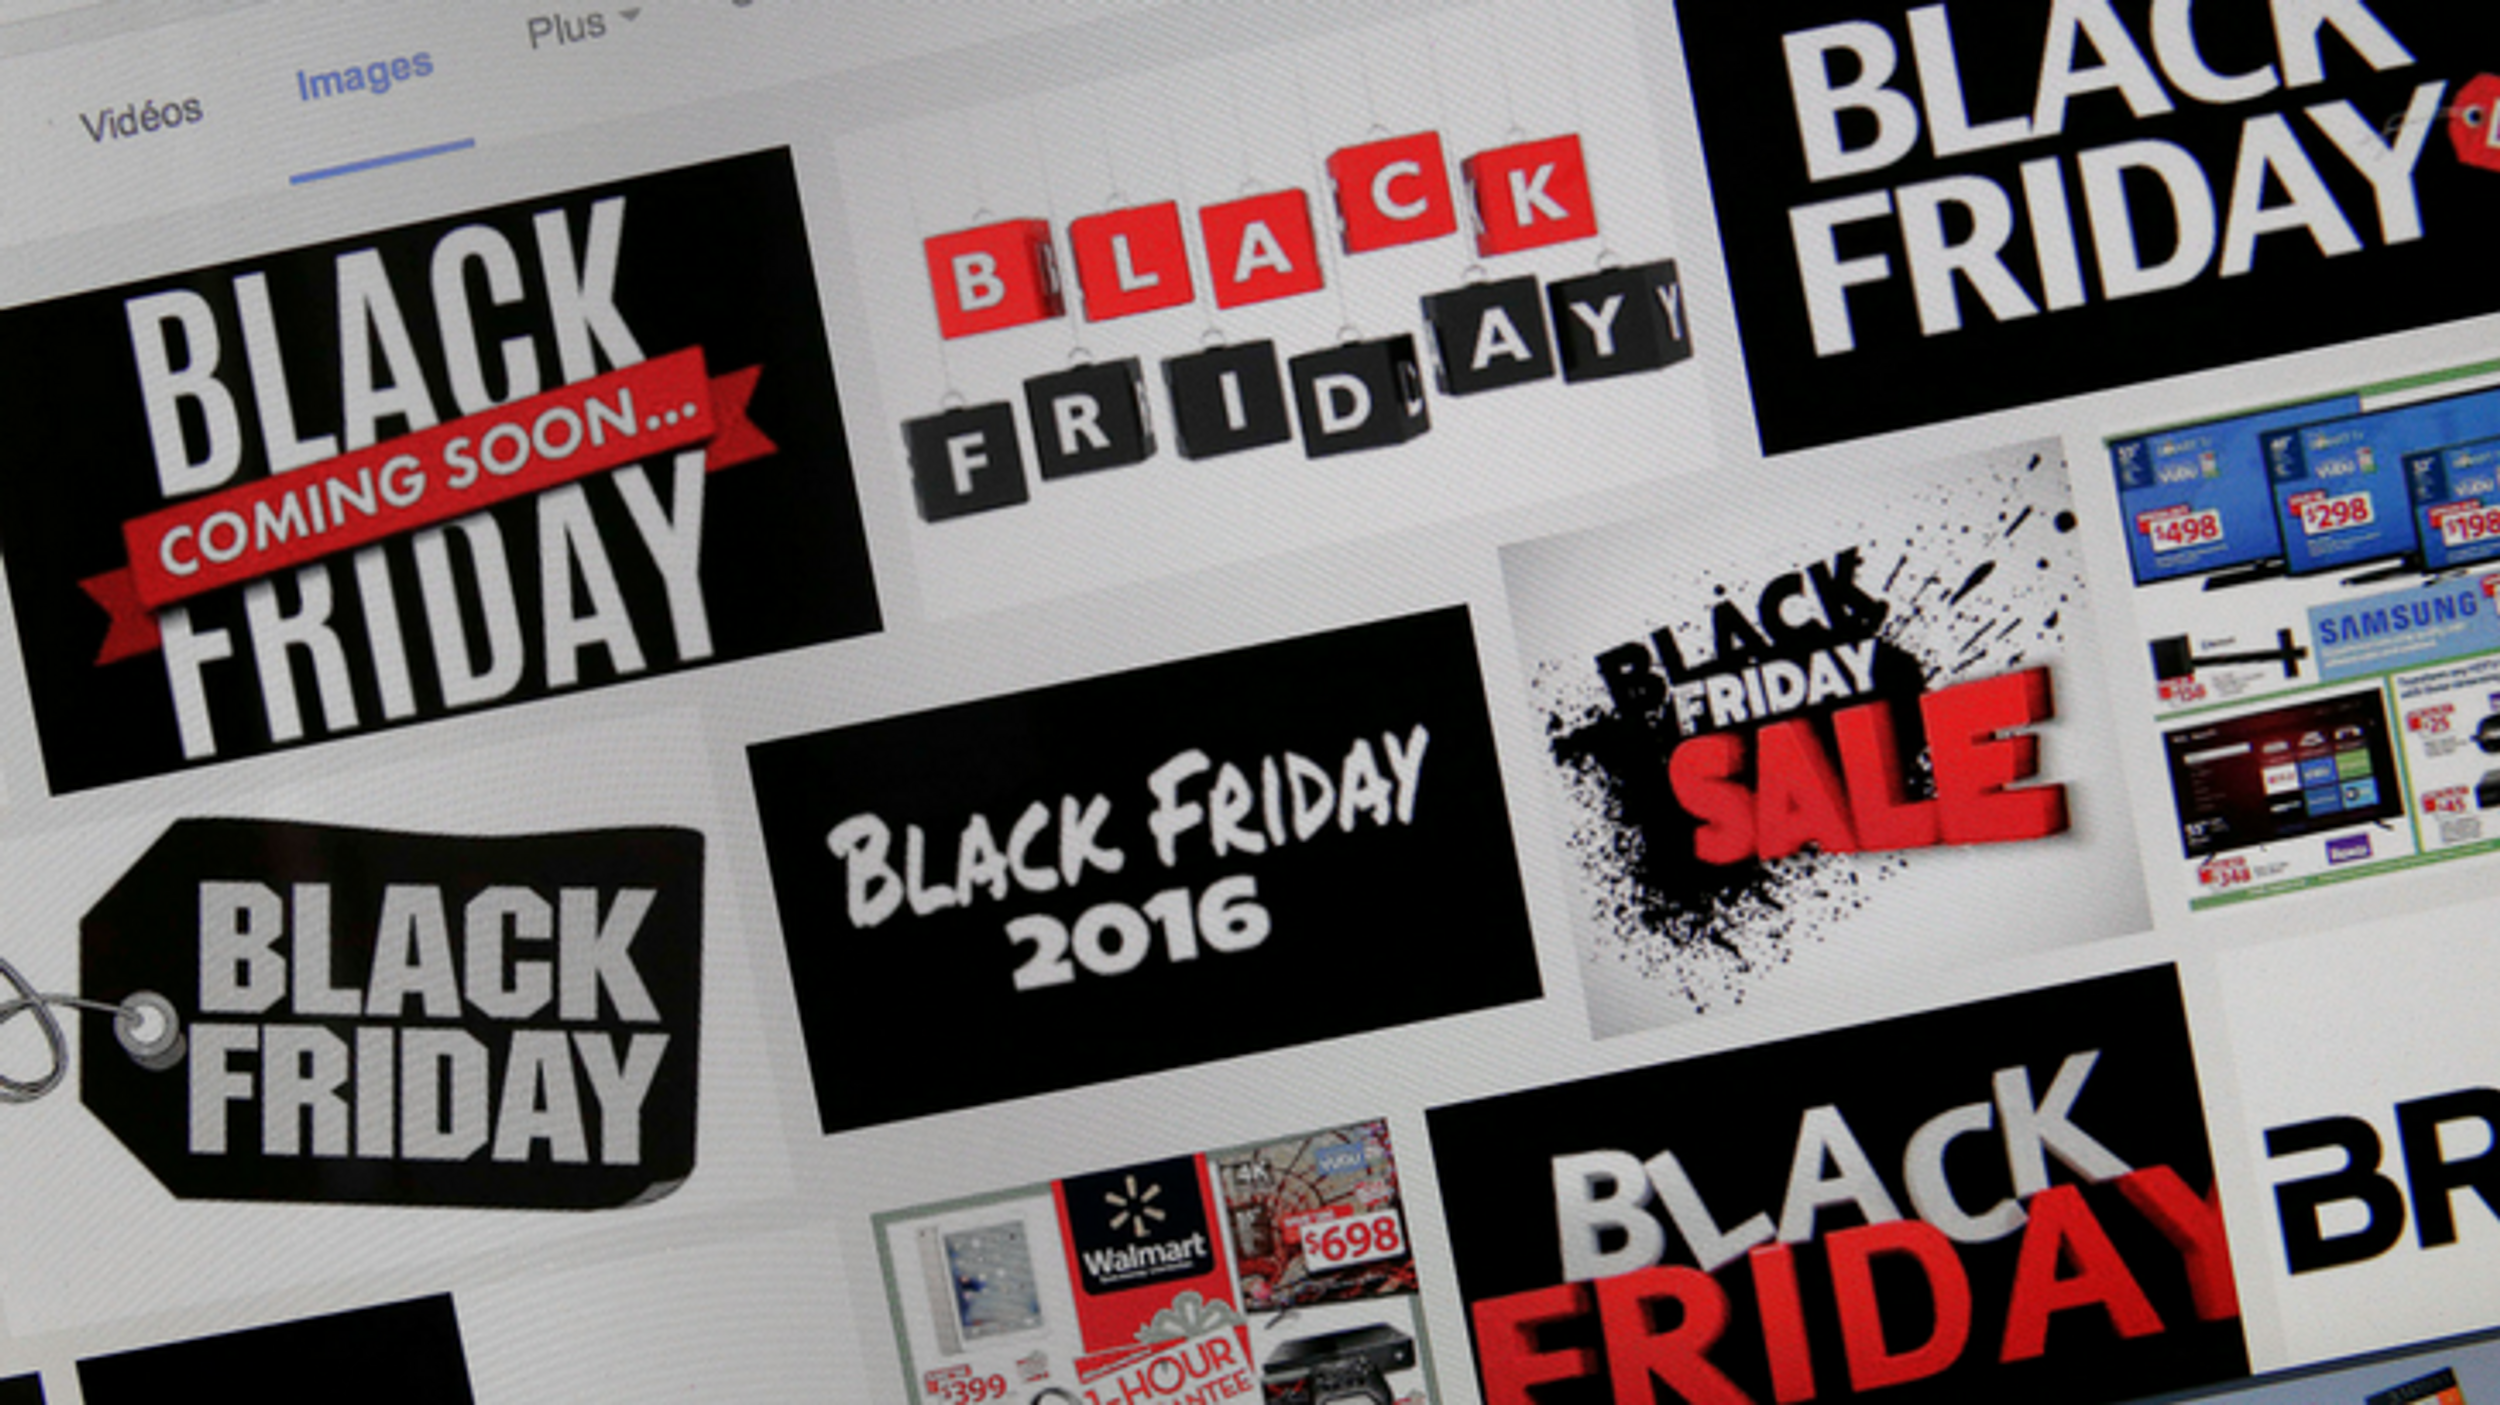 Black Friday Deals: Where to Shop